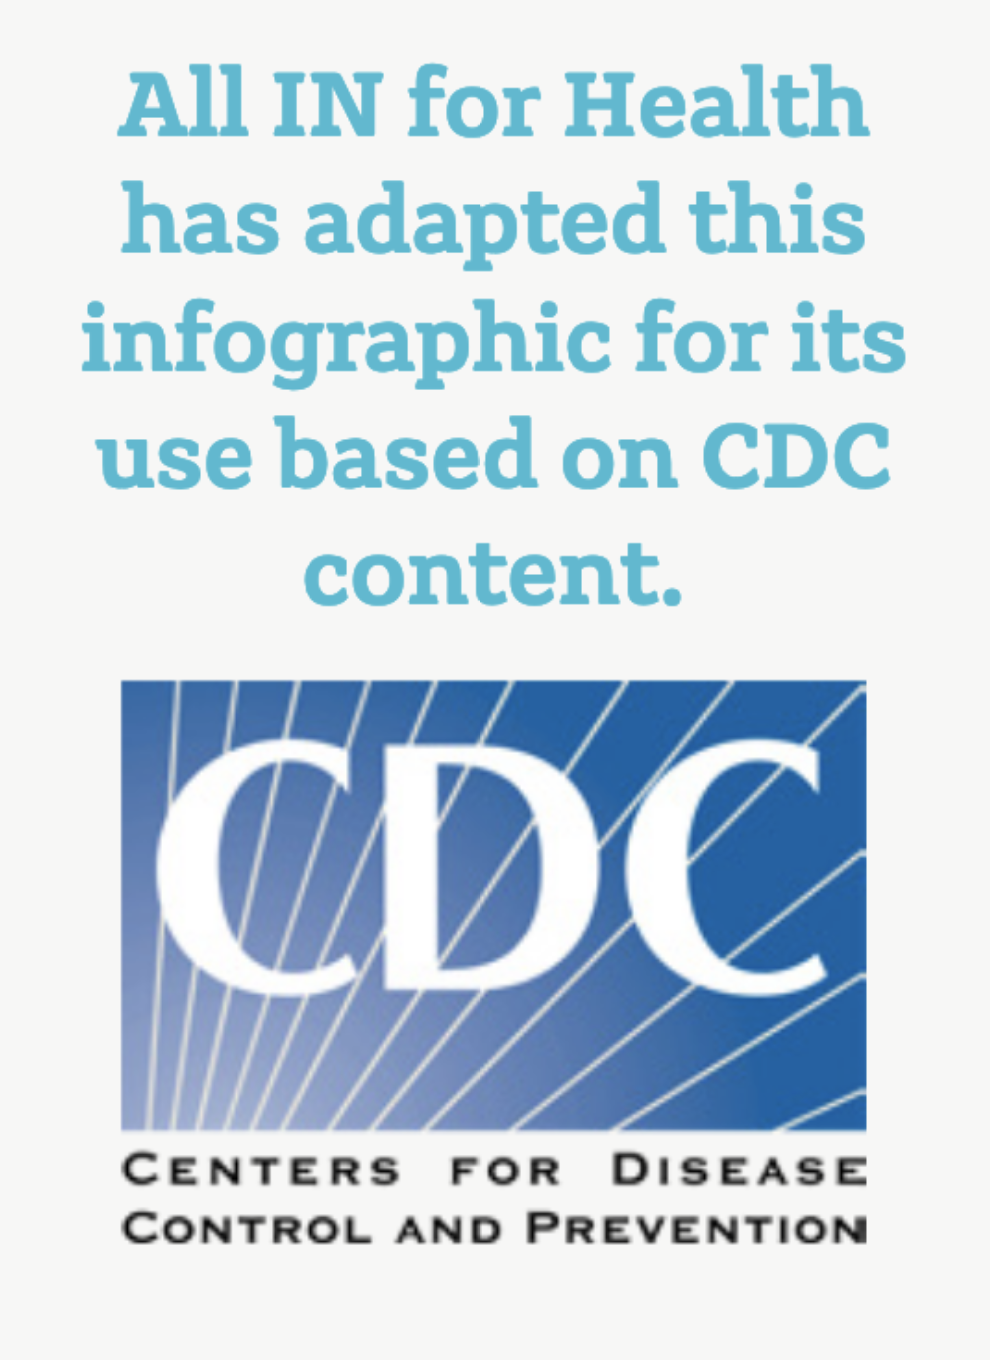 All IN for Health has adapted this infographic for its use based on CDC content.